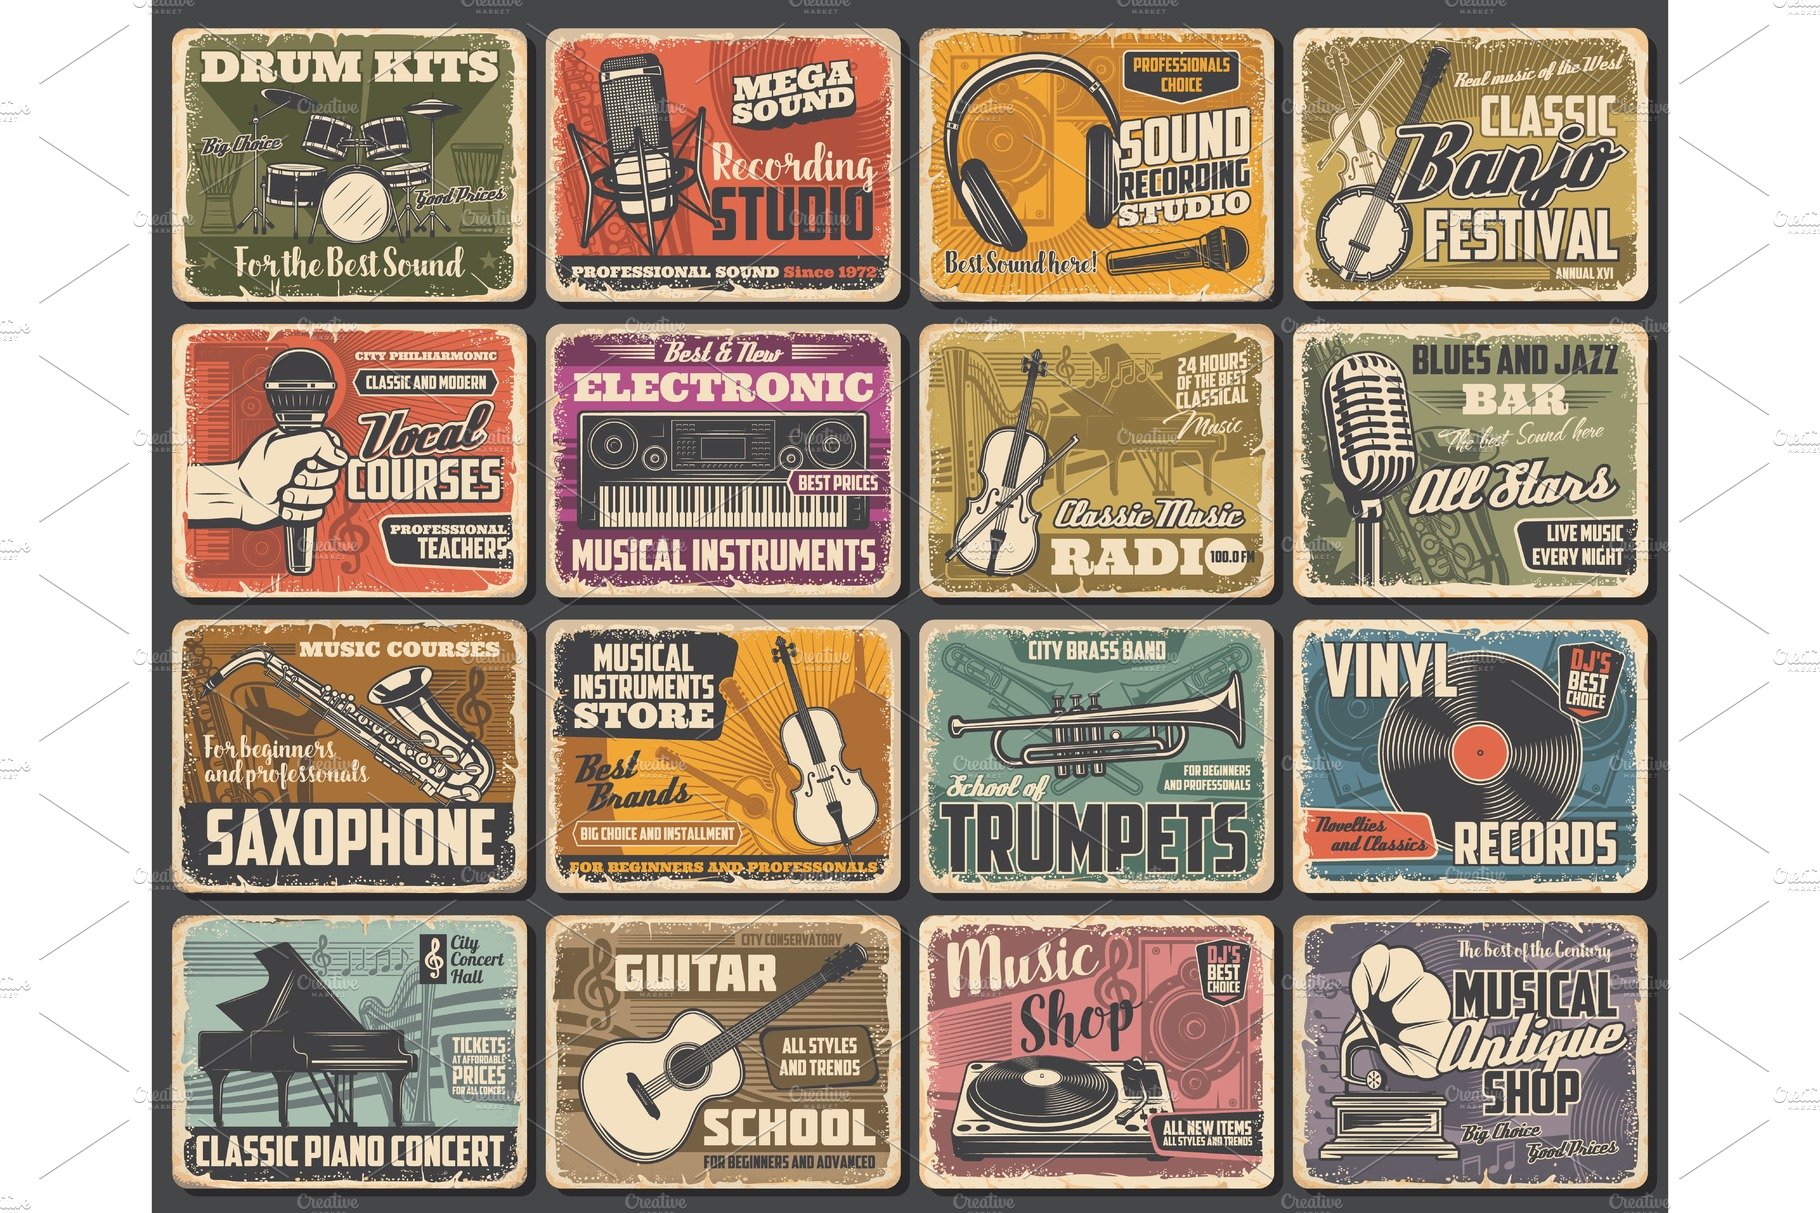 Musical instruments store, festival cover image.